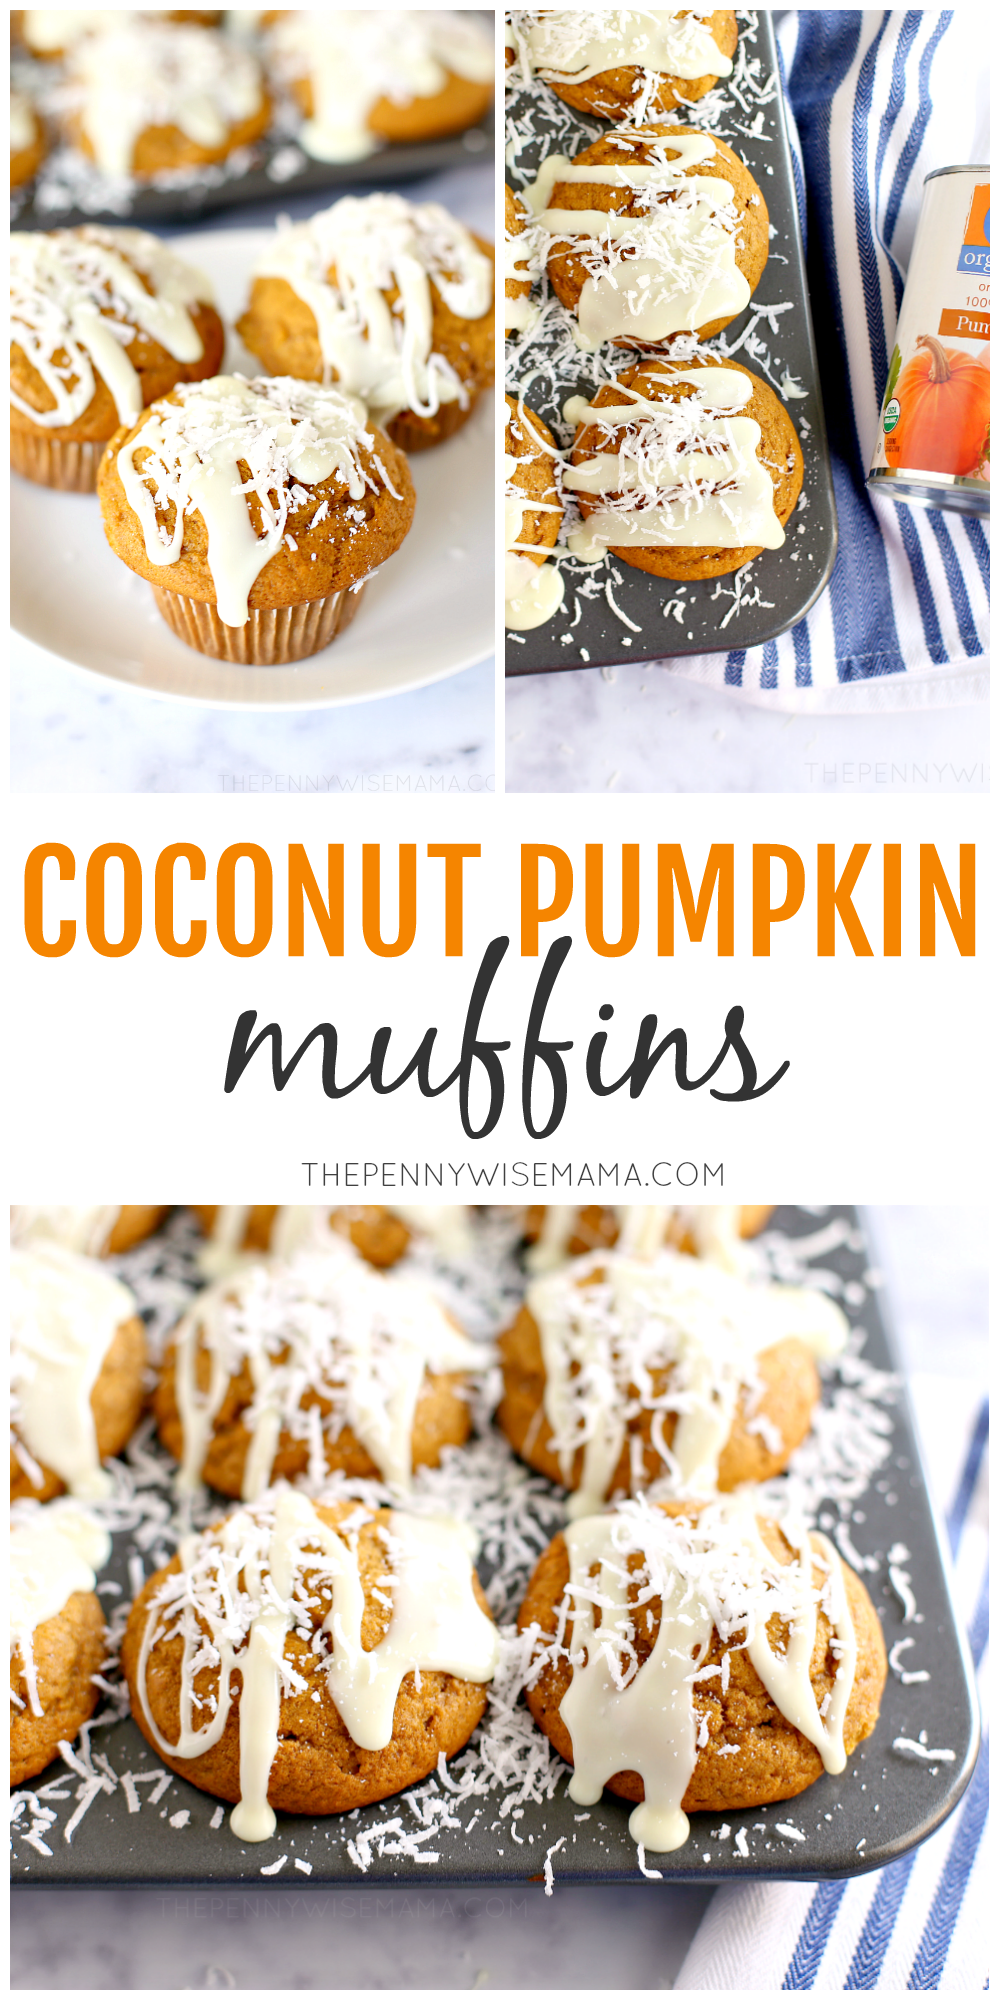 These Coconut Pumpkin Muffins are soft, moist, and full of flavor. Topped with shredded coconut and a white chocolate glaze, they are the perfect breakfast, snack, or holiday treat!